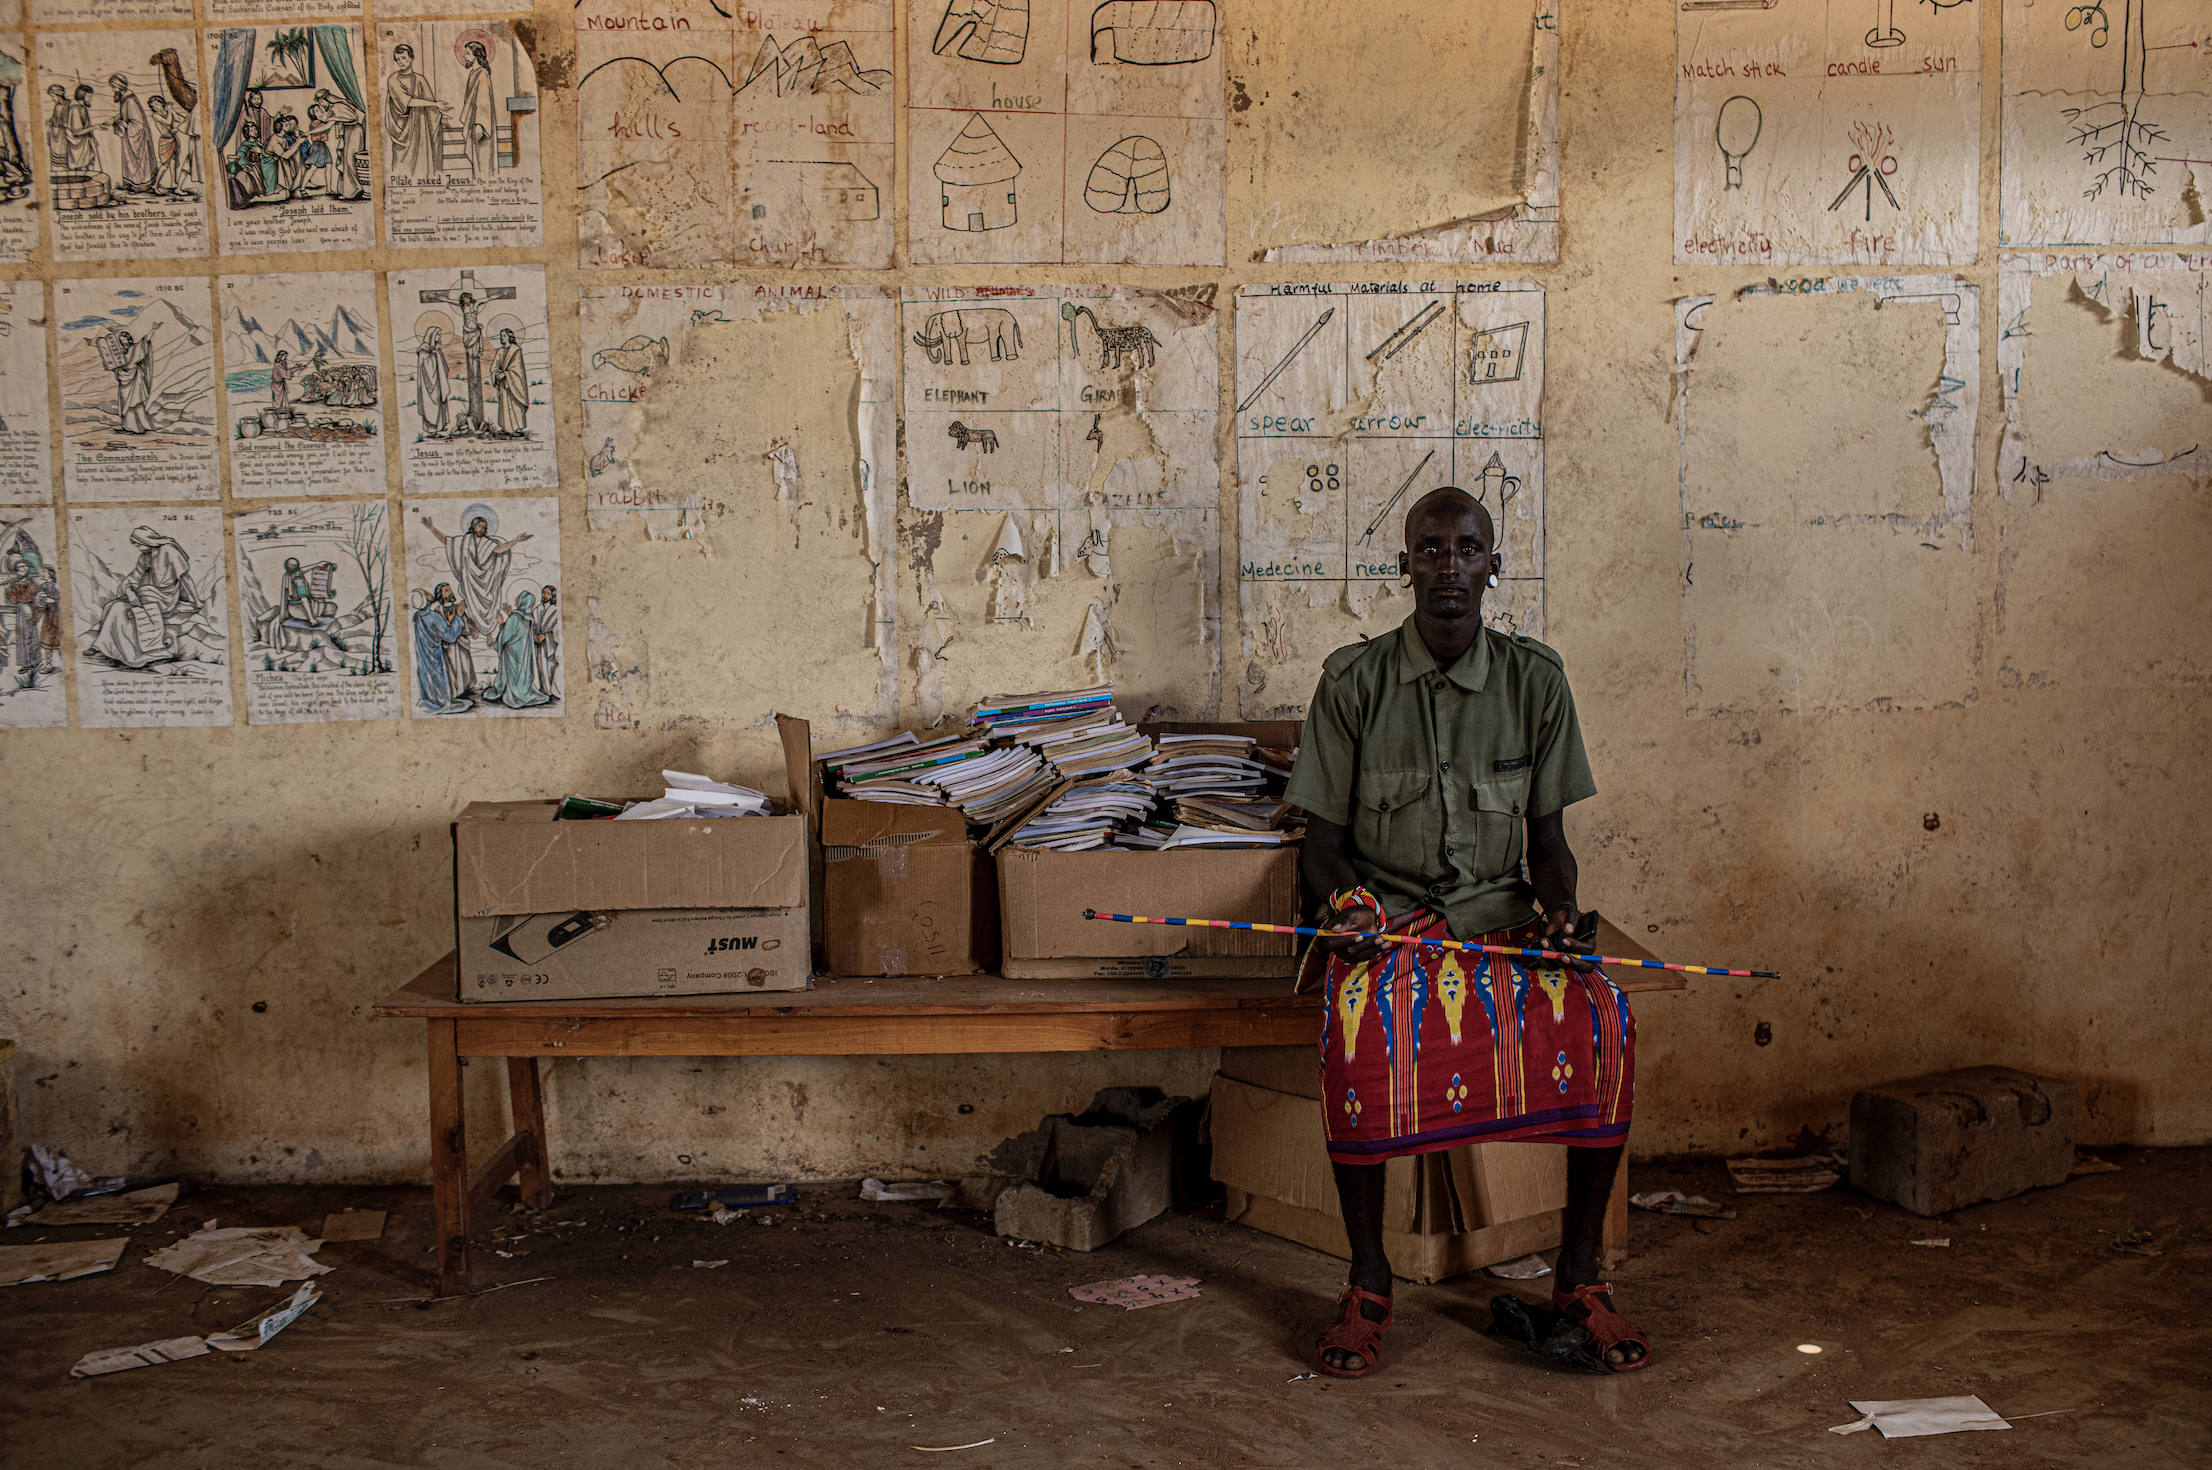 A young Rendille moran sits in a shuttered school building near the town of Laisamis in Kenya. Young men broke the windows of the school and have been living in the classrooms since the school was closed due to the COVID-19 pandemic. Image by Will Swanson. Kenya, 2020.